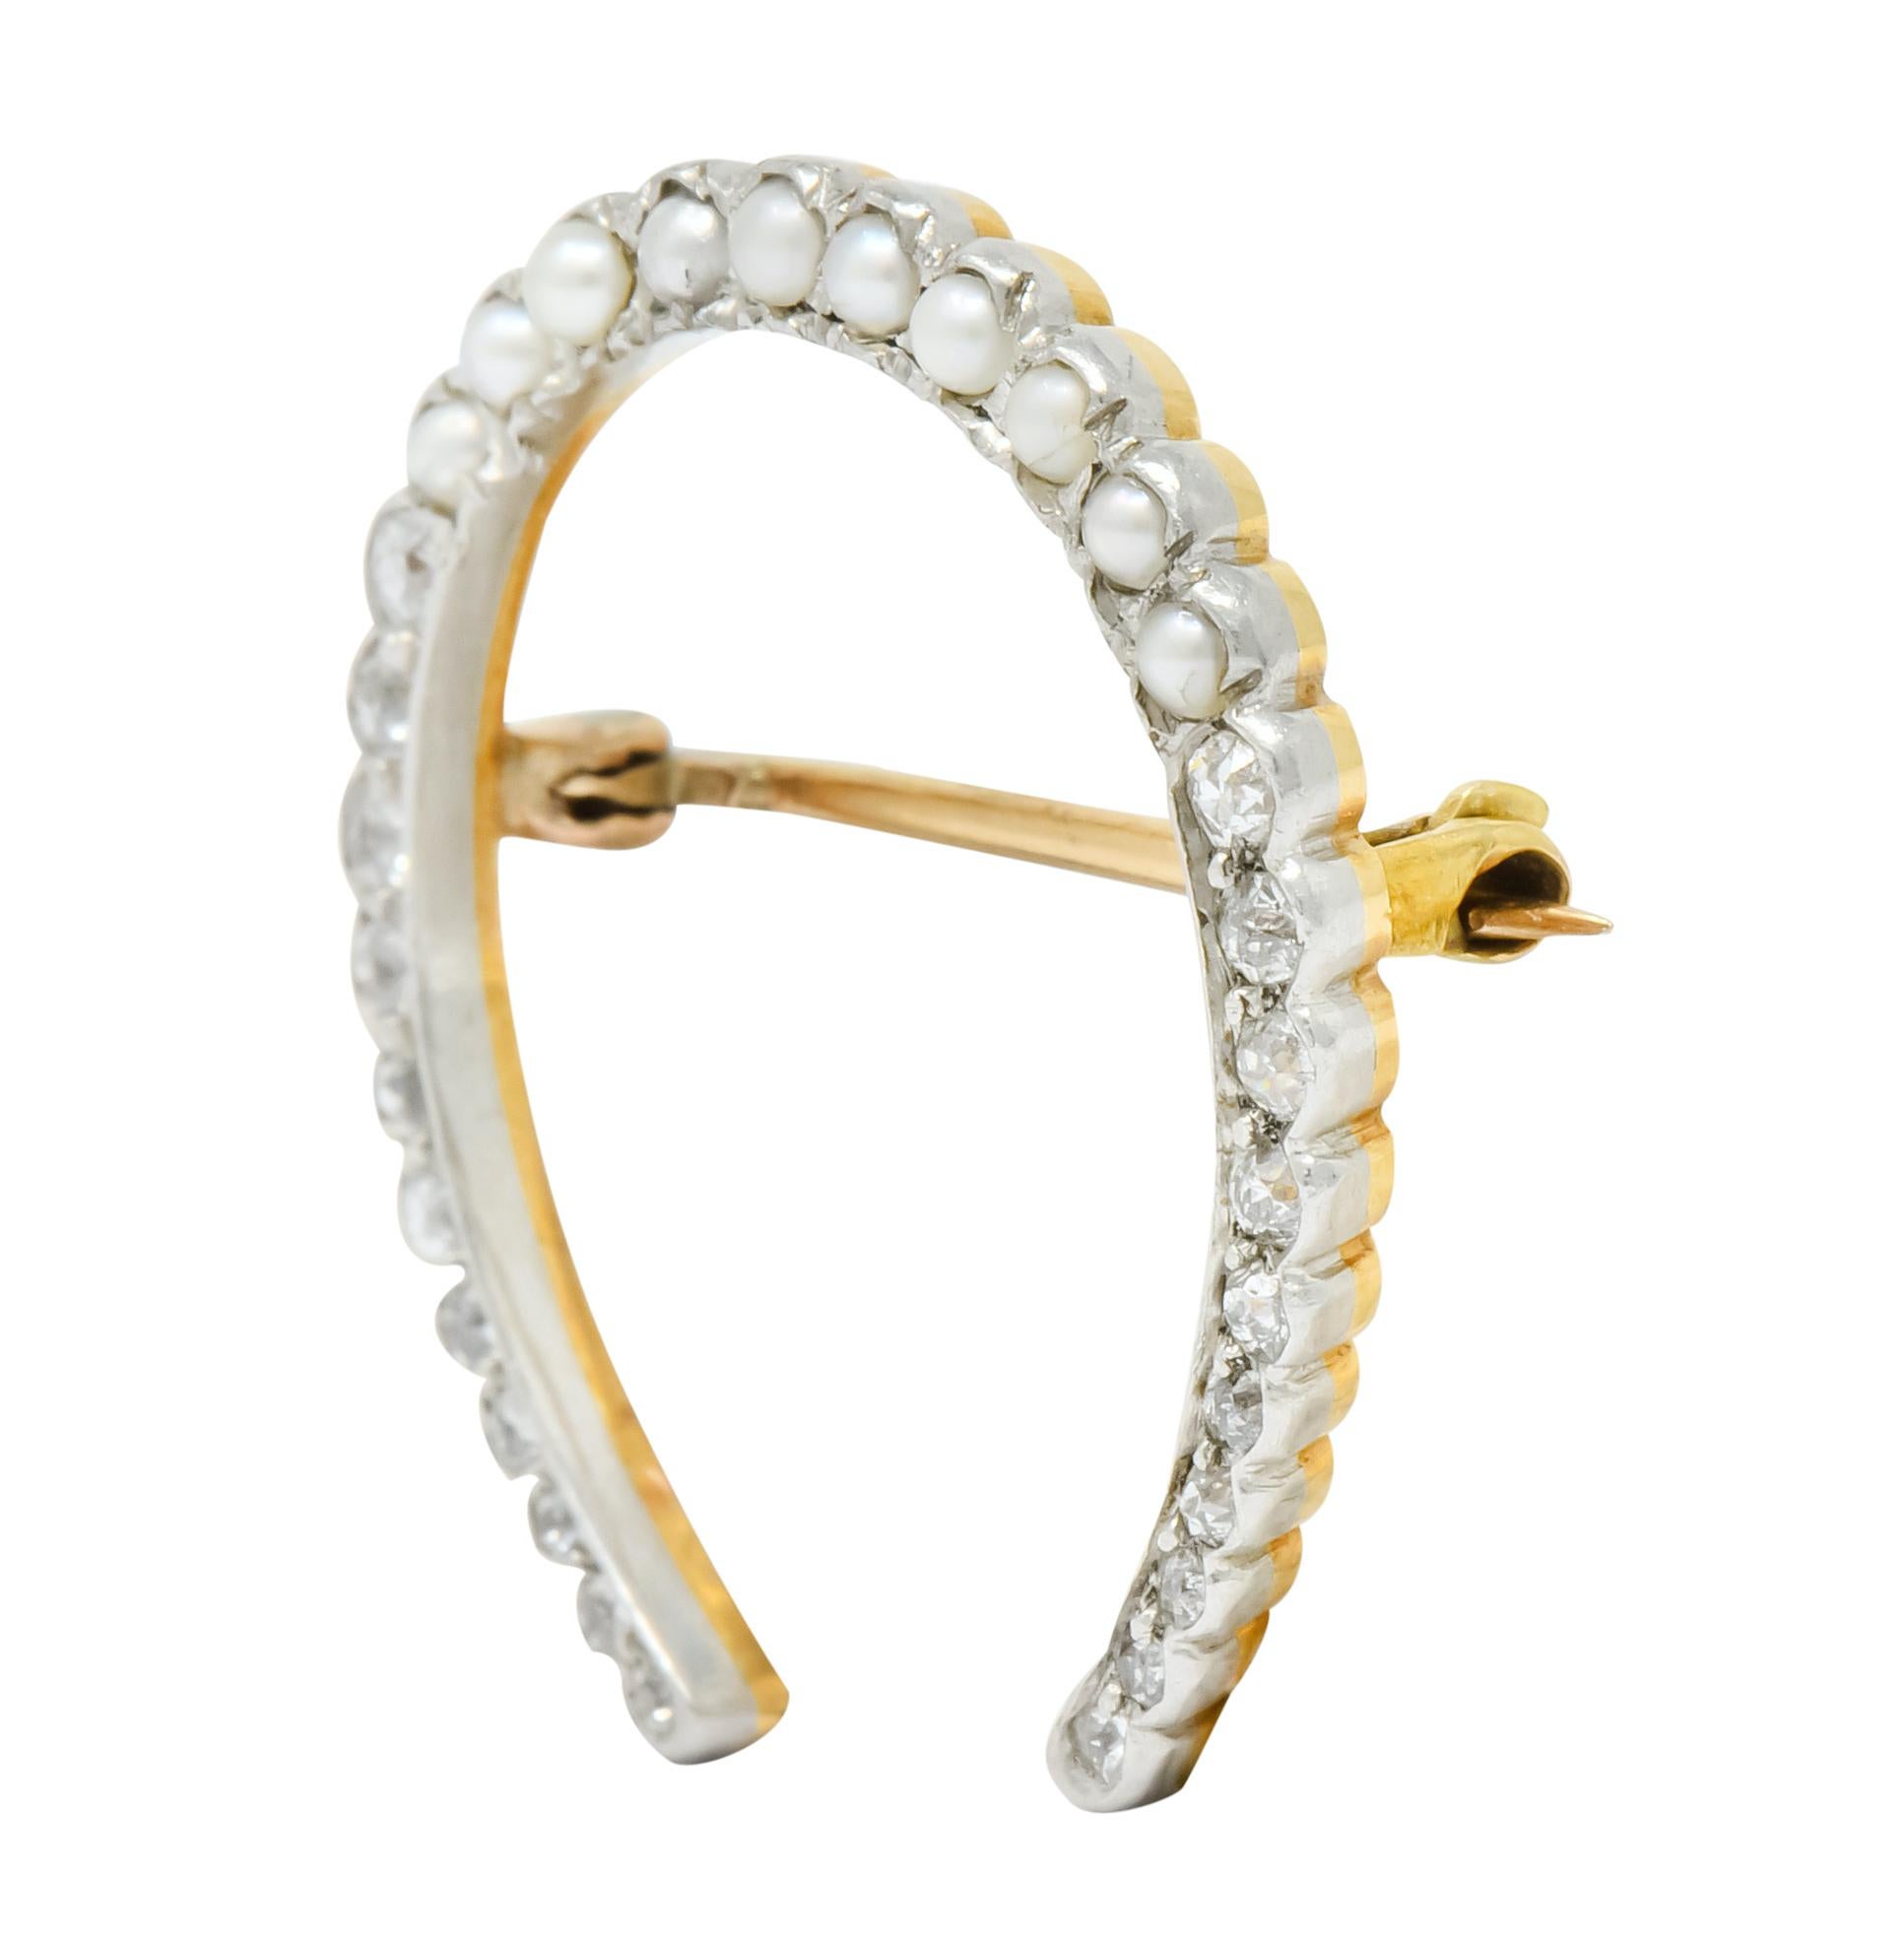 Designed as a horseshoe with a scalloped platinum edge

Set with old European cut diamonds weighing approximately 0.25 carat total, H/I color and SI clarity

Accented by round seed pearls measuring approximately 1.5 mm

Completed by gold pin stem